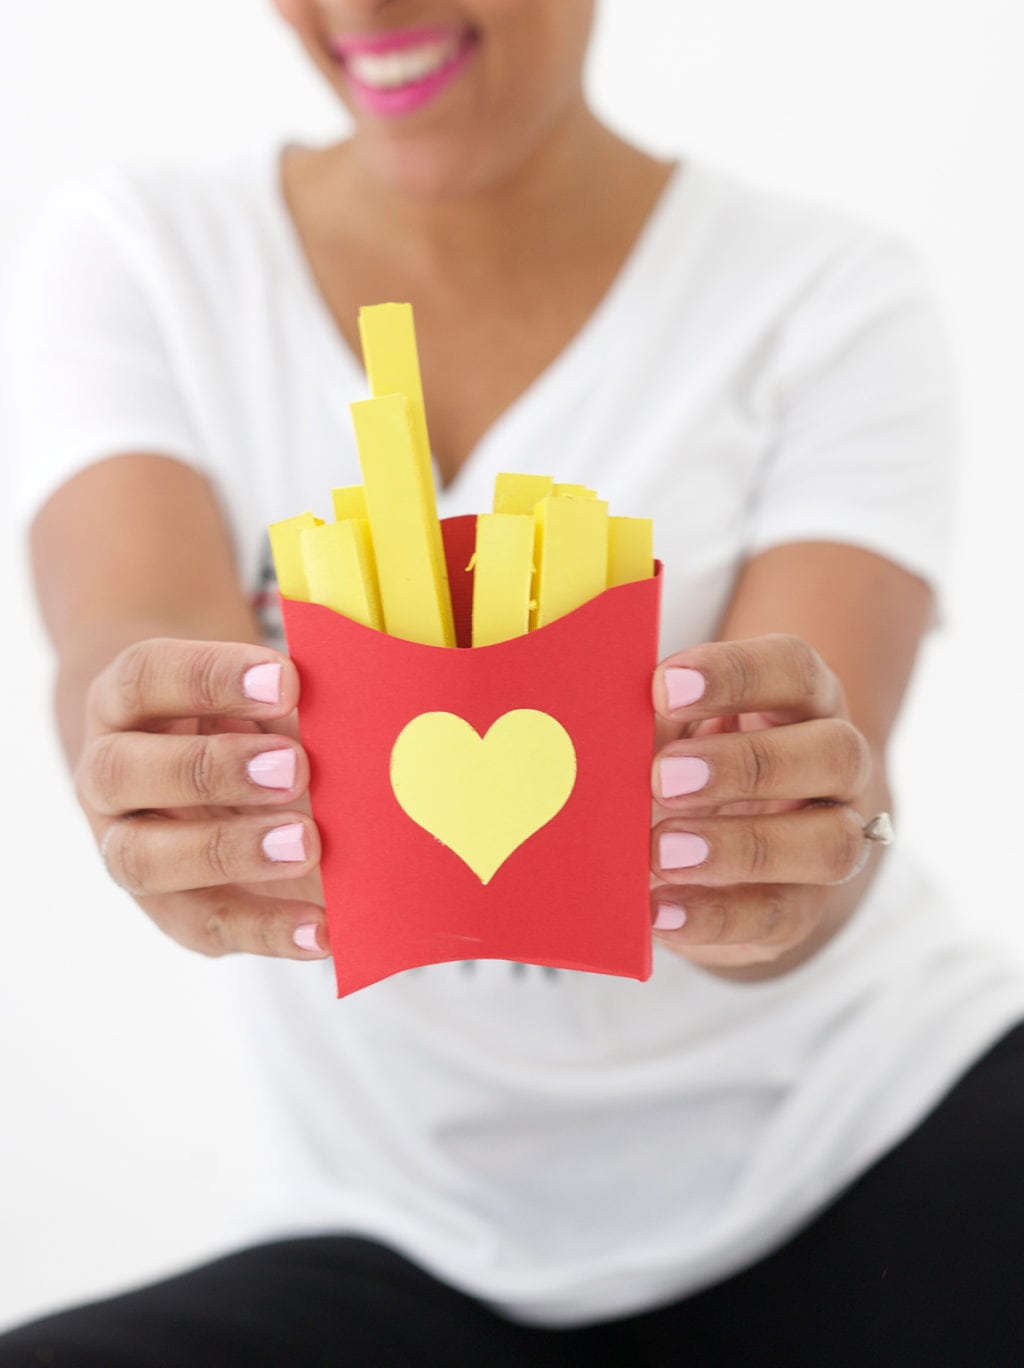 Cardio is great but sometimes you need to indulge in a little golden brown deliciousness! Trade the exercise for Extra Fries with this DIY Iron on Tee!